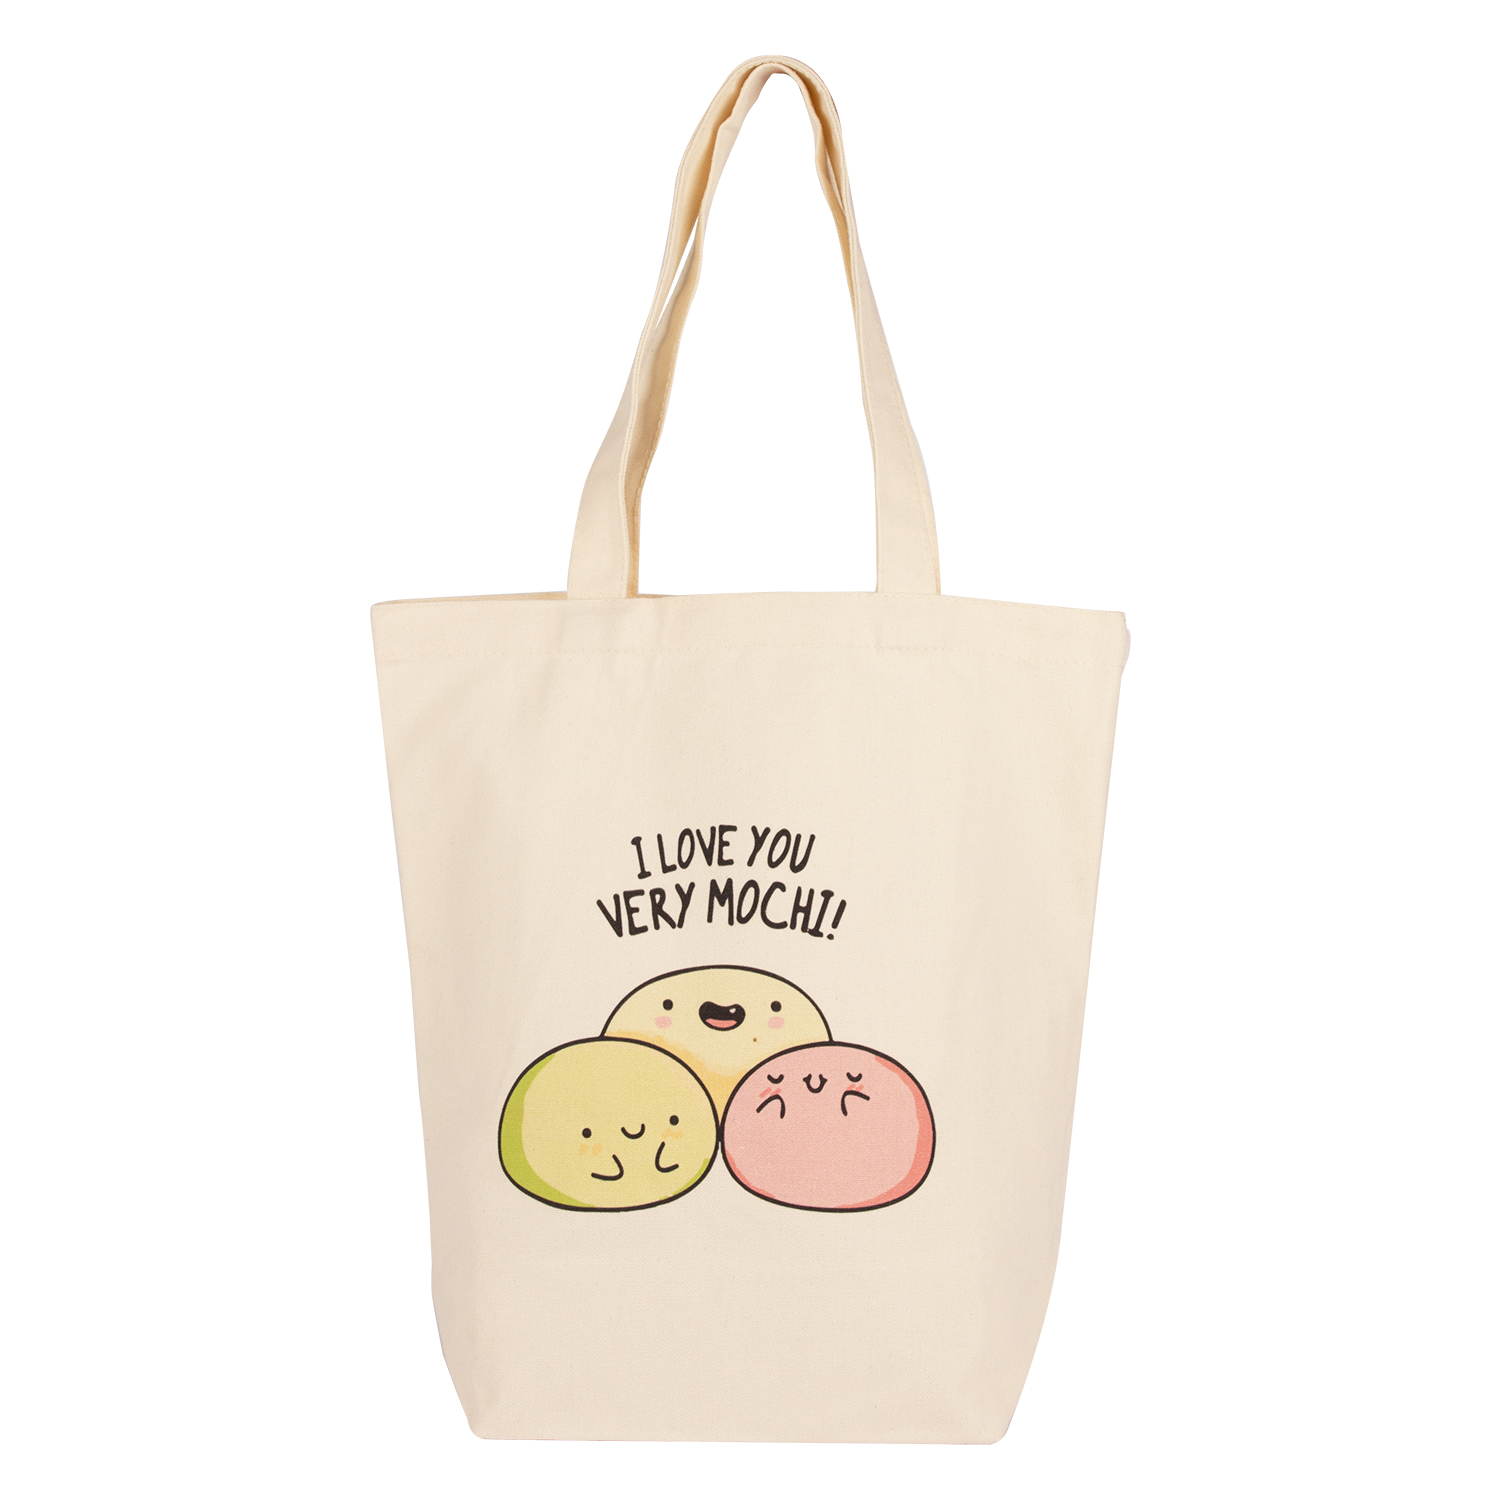 OEM customized canvas tote bag with inside pockets